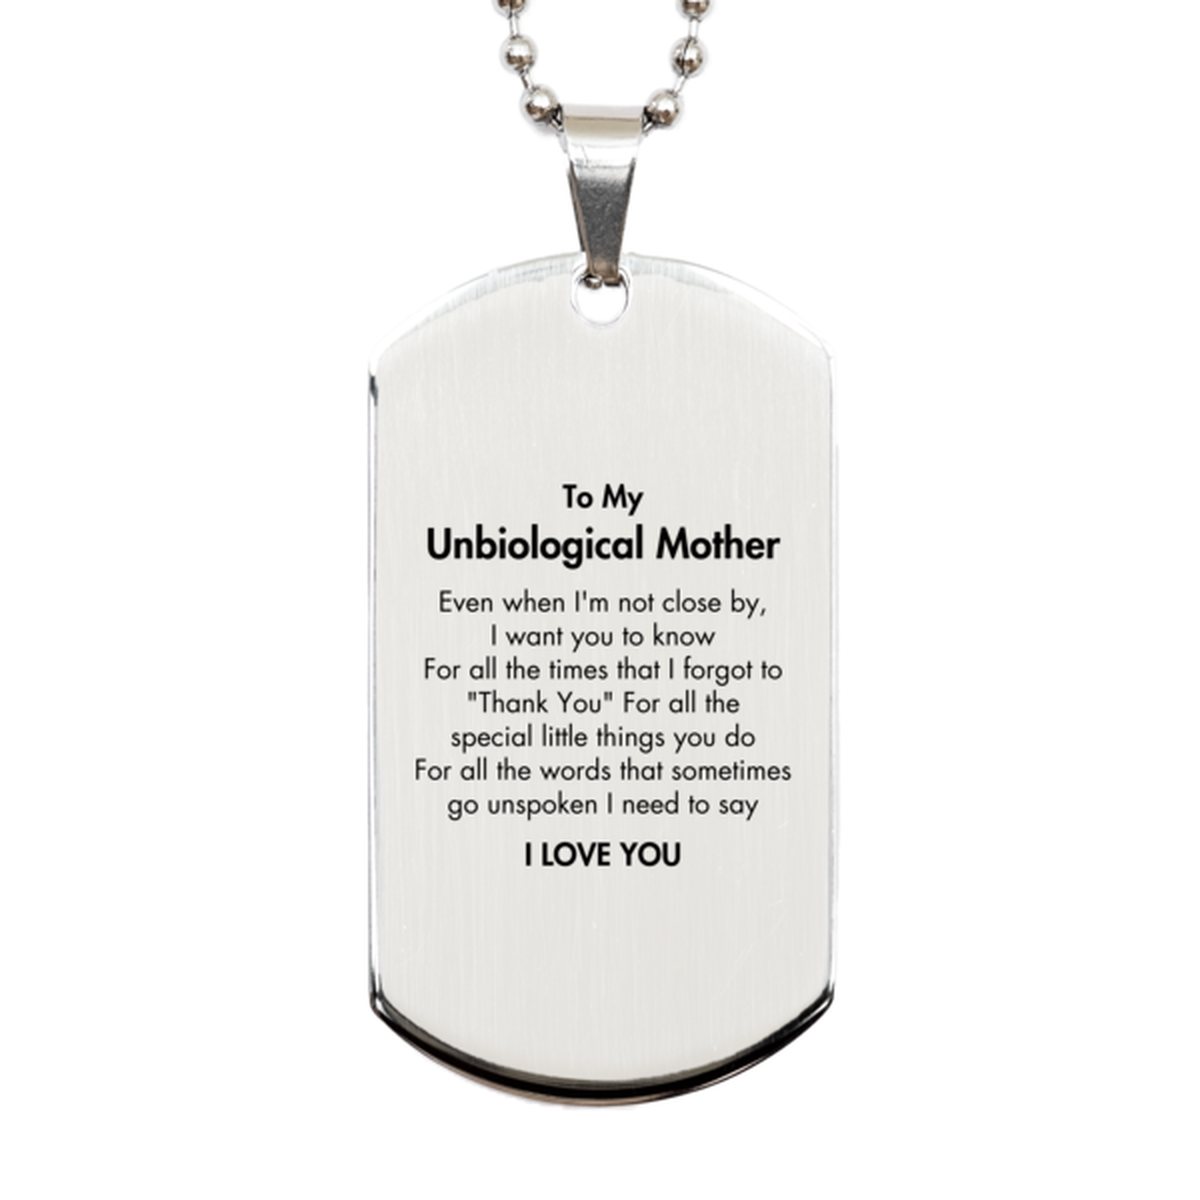 Thank You Gifts for Unbiological Mother, Keepsake Silver Dog Tag Gifts for Unbiological Mother Birthday Mother's day Father's Day Unbiological Mother For all the words That sometimes go unspoken I need to say I LOVE YOU